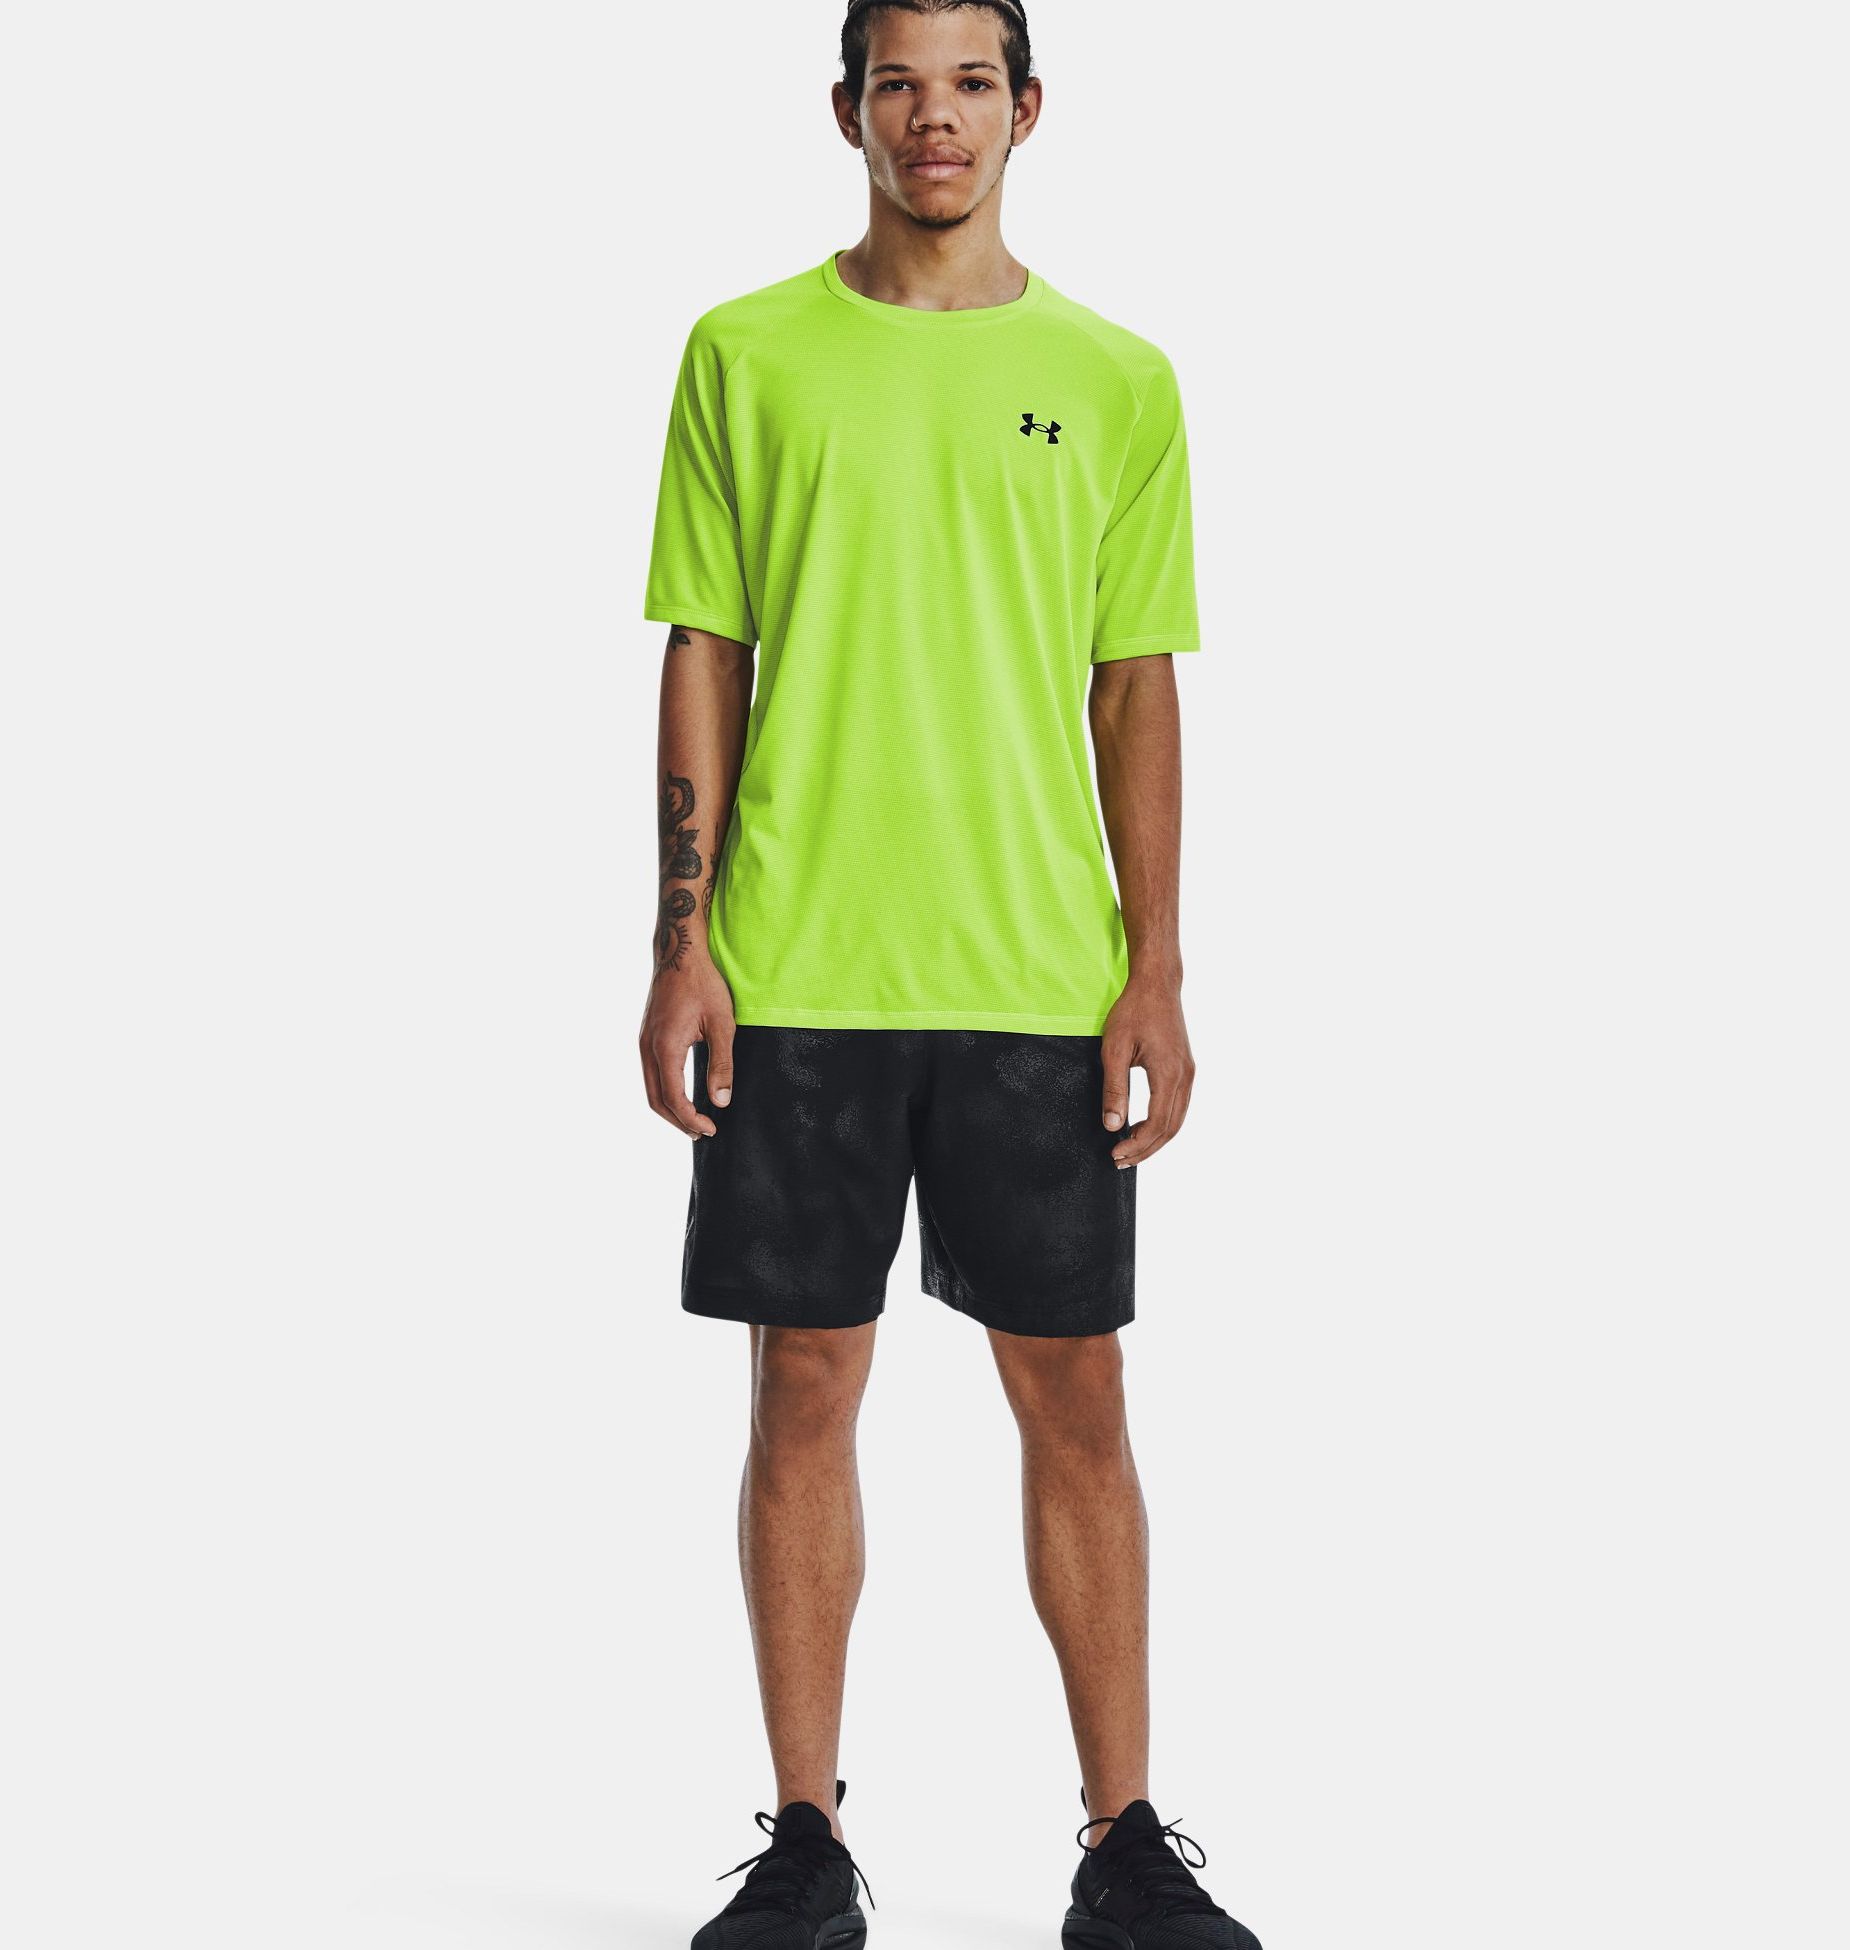 Shorts -  under armour Woven Emboss Shorts 